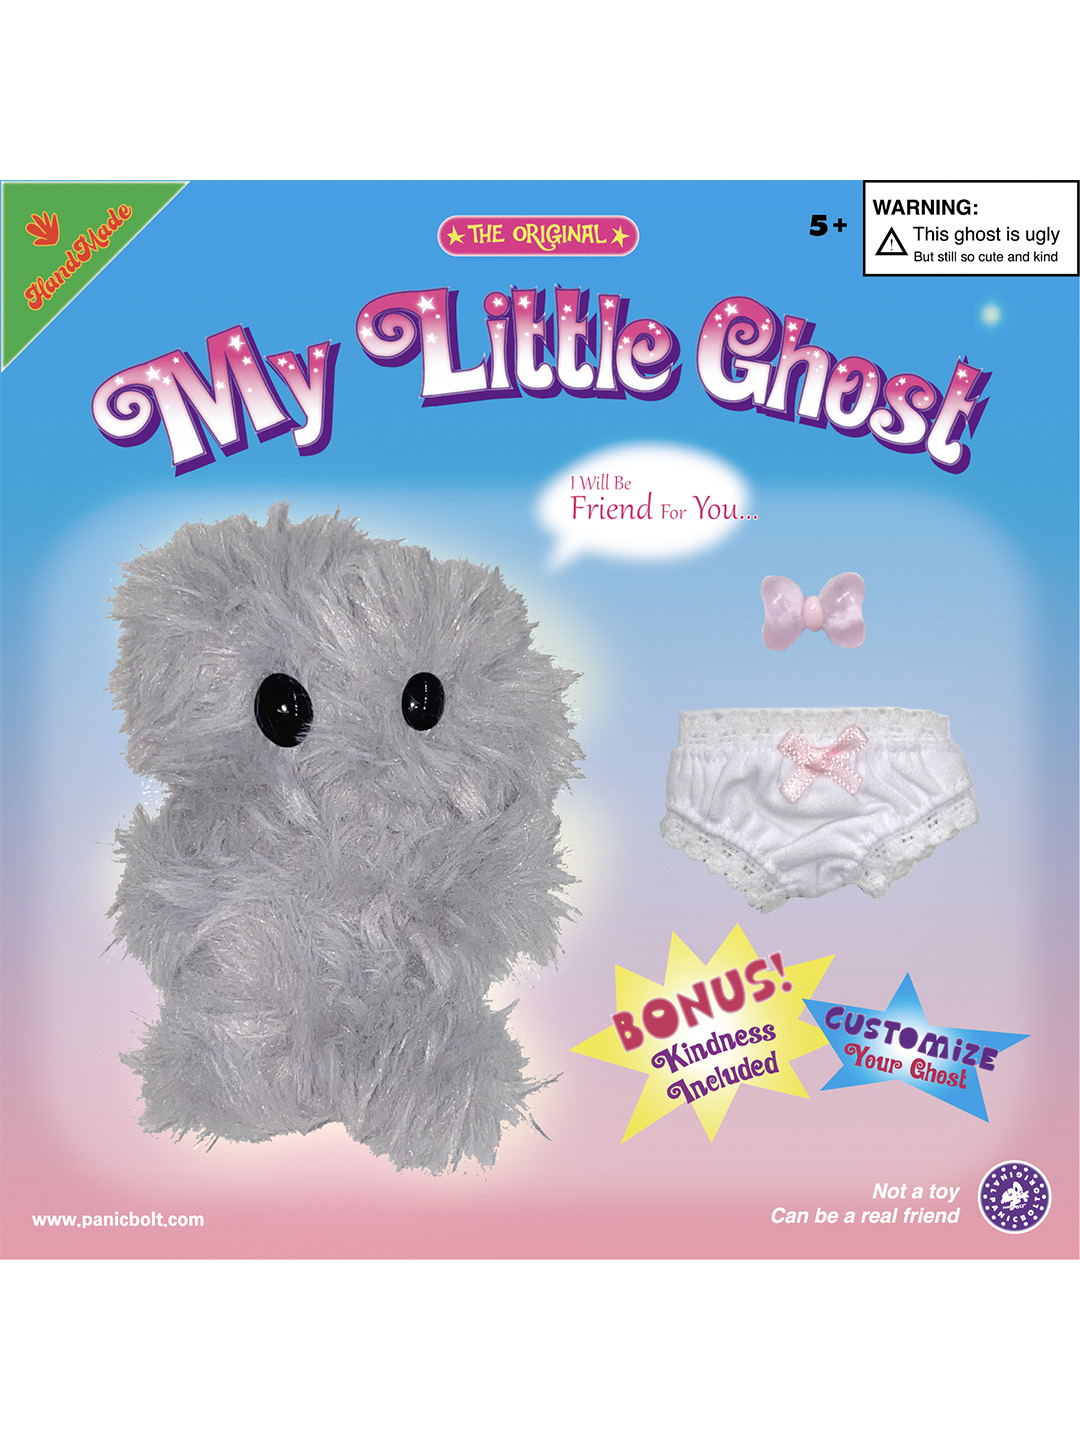 PANICBOLTMy little ghost keychain kit